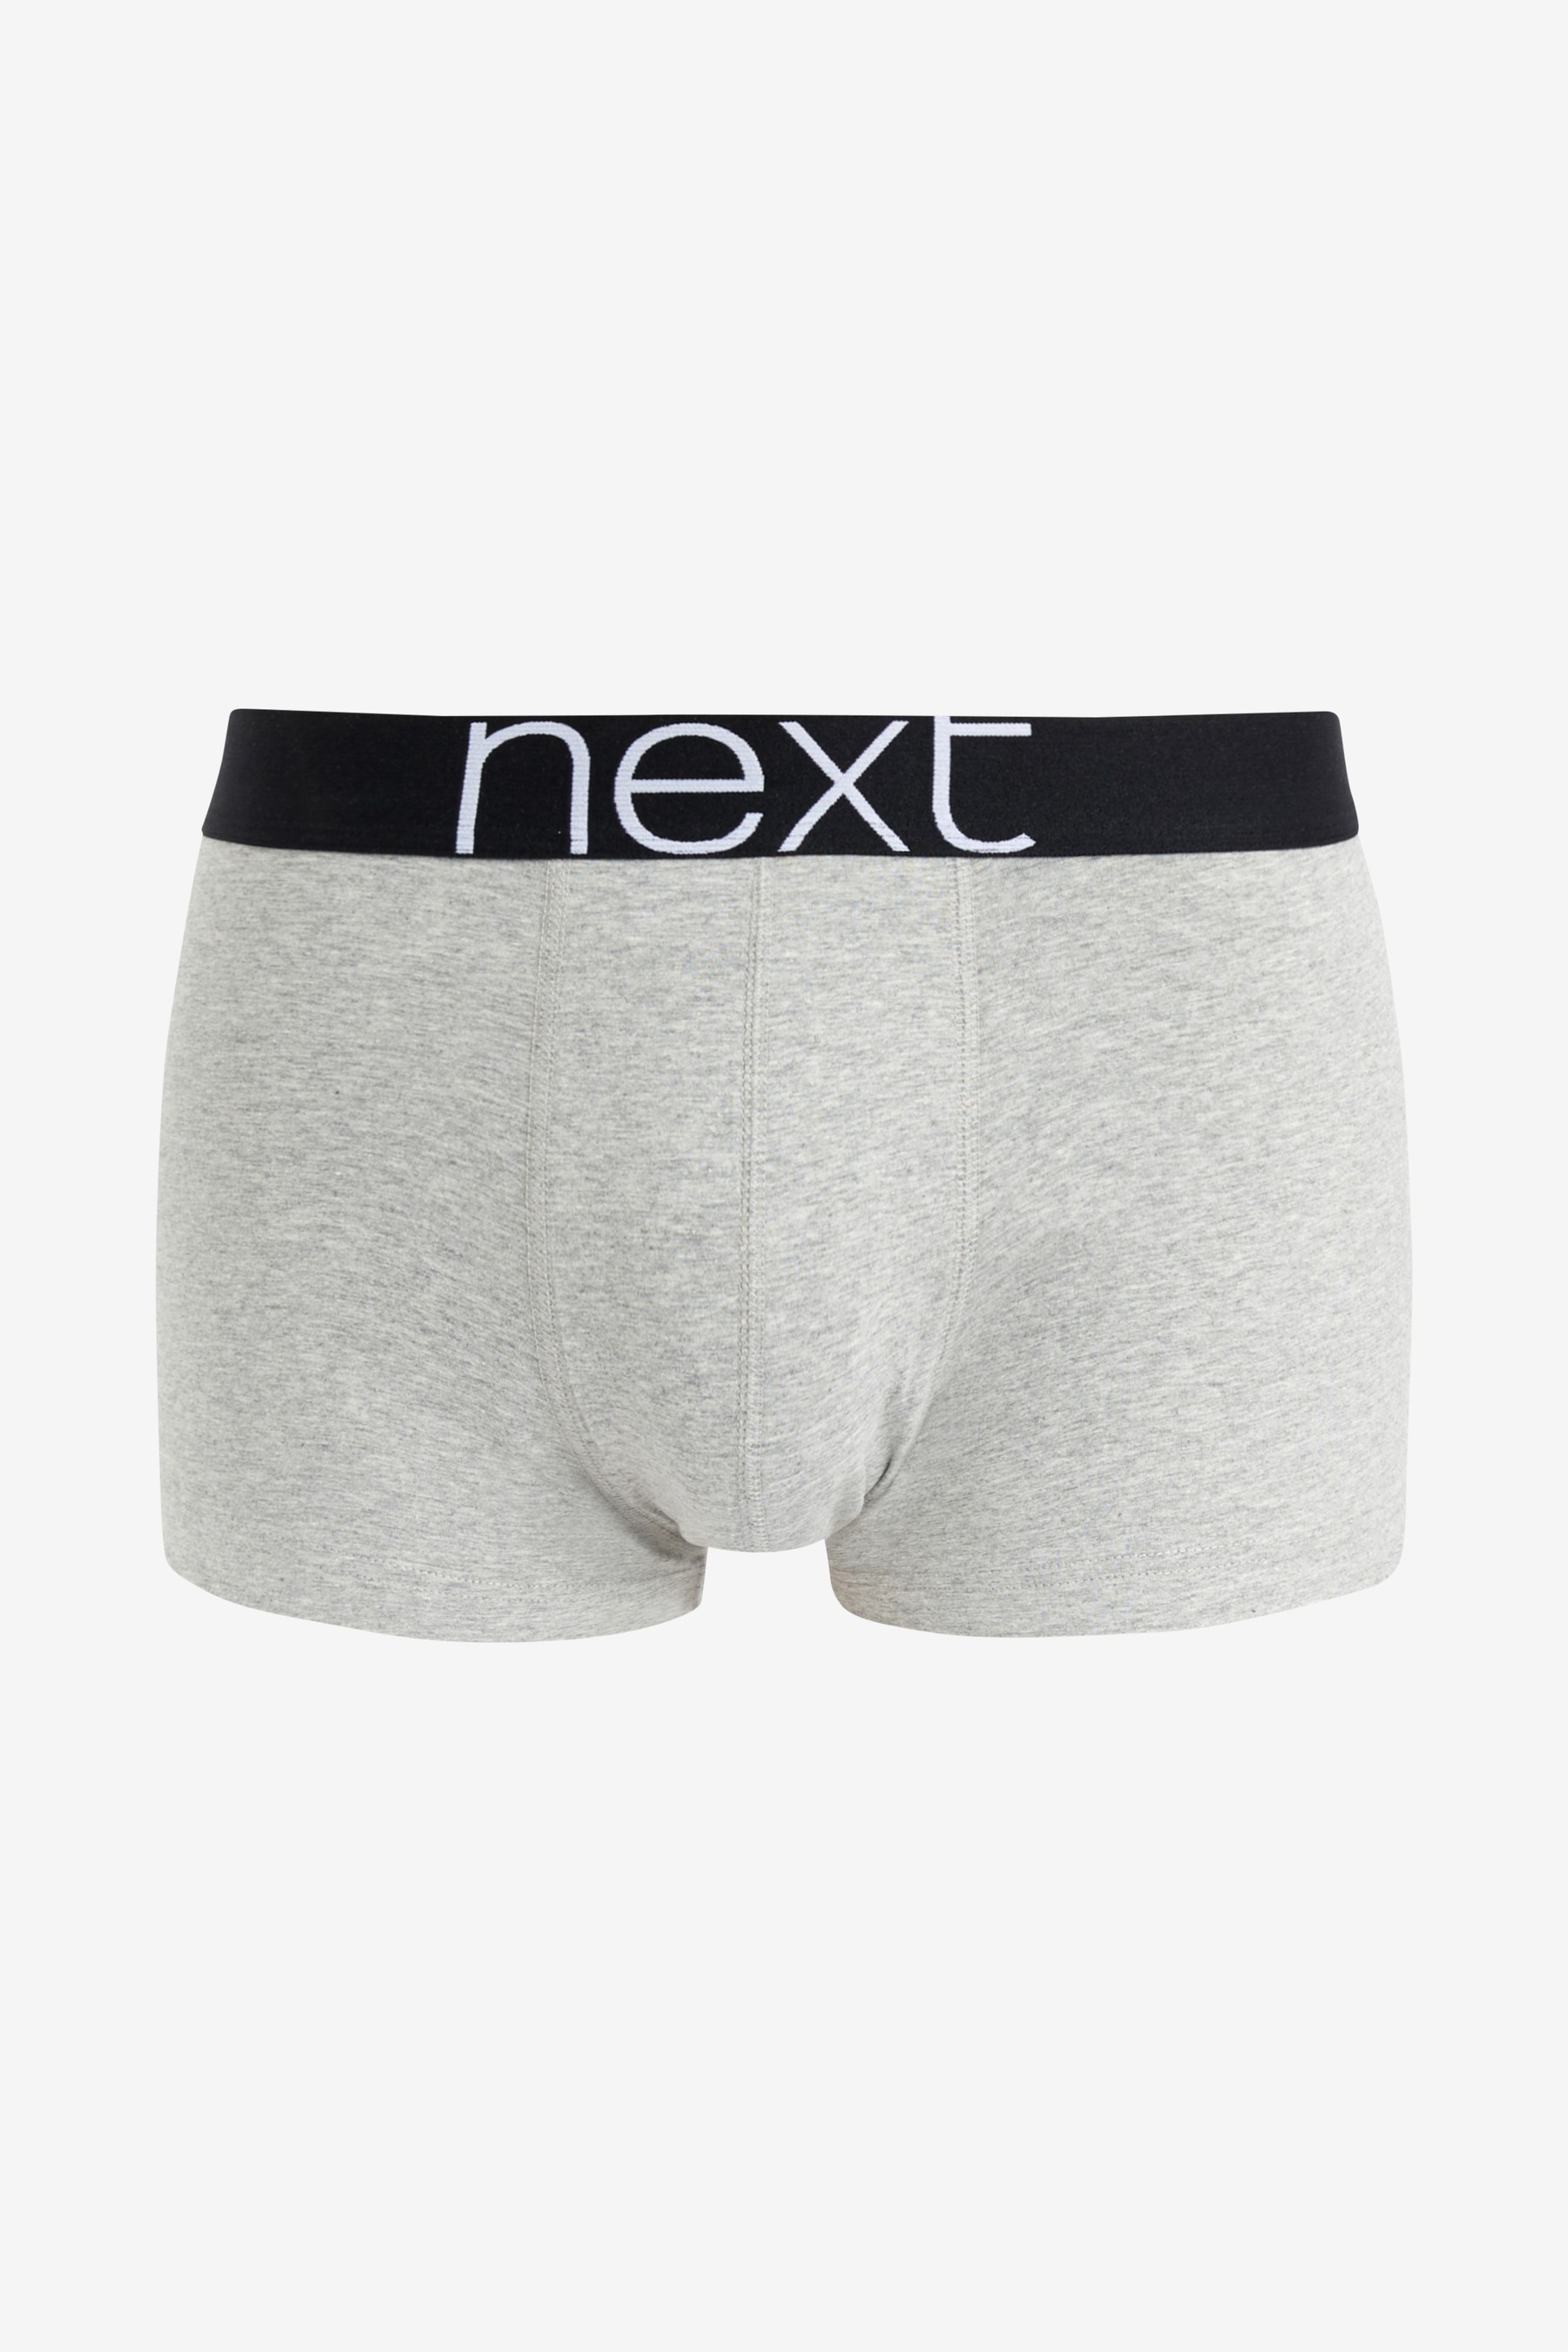 Hipster Boxers 10 Pack